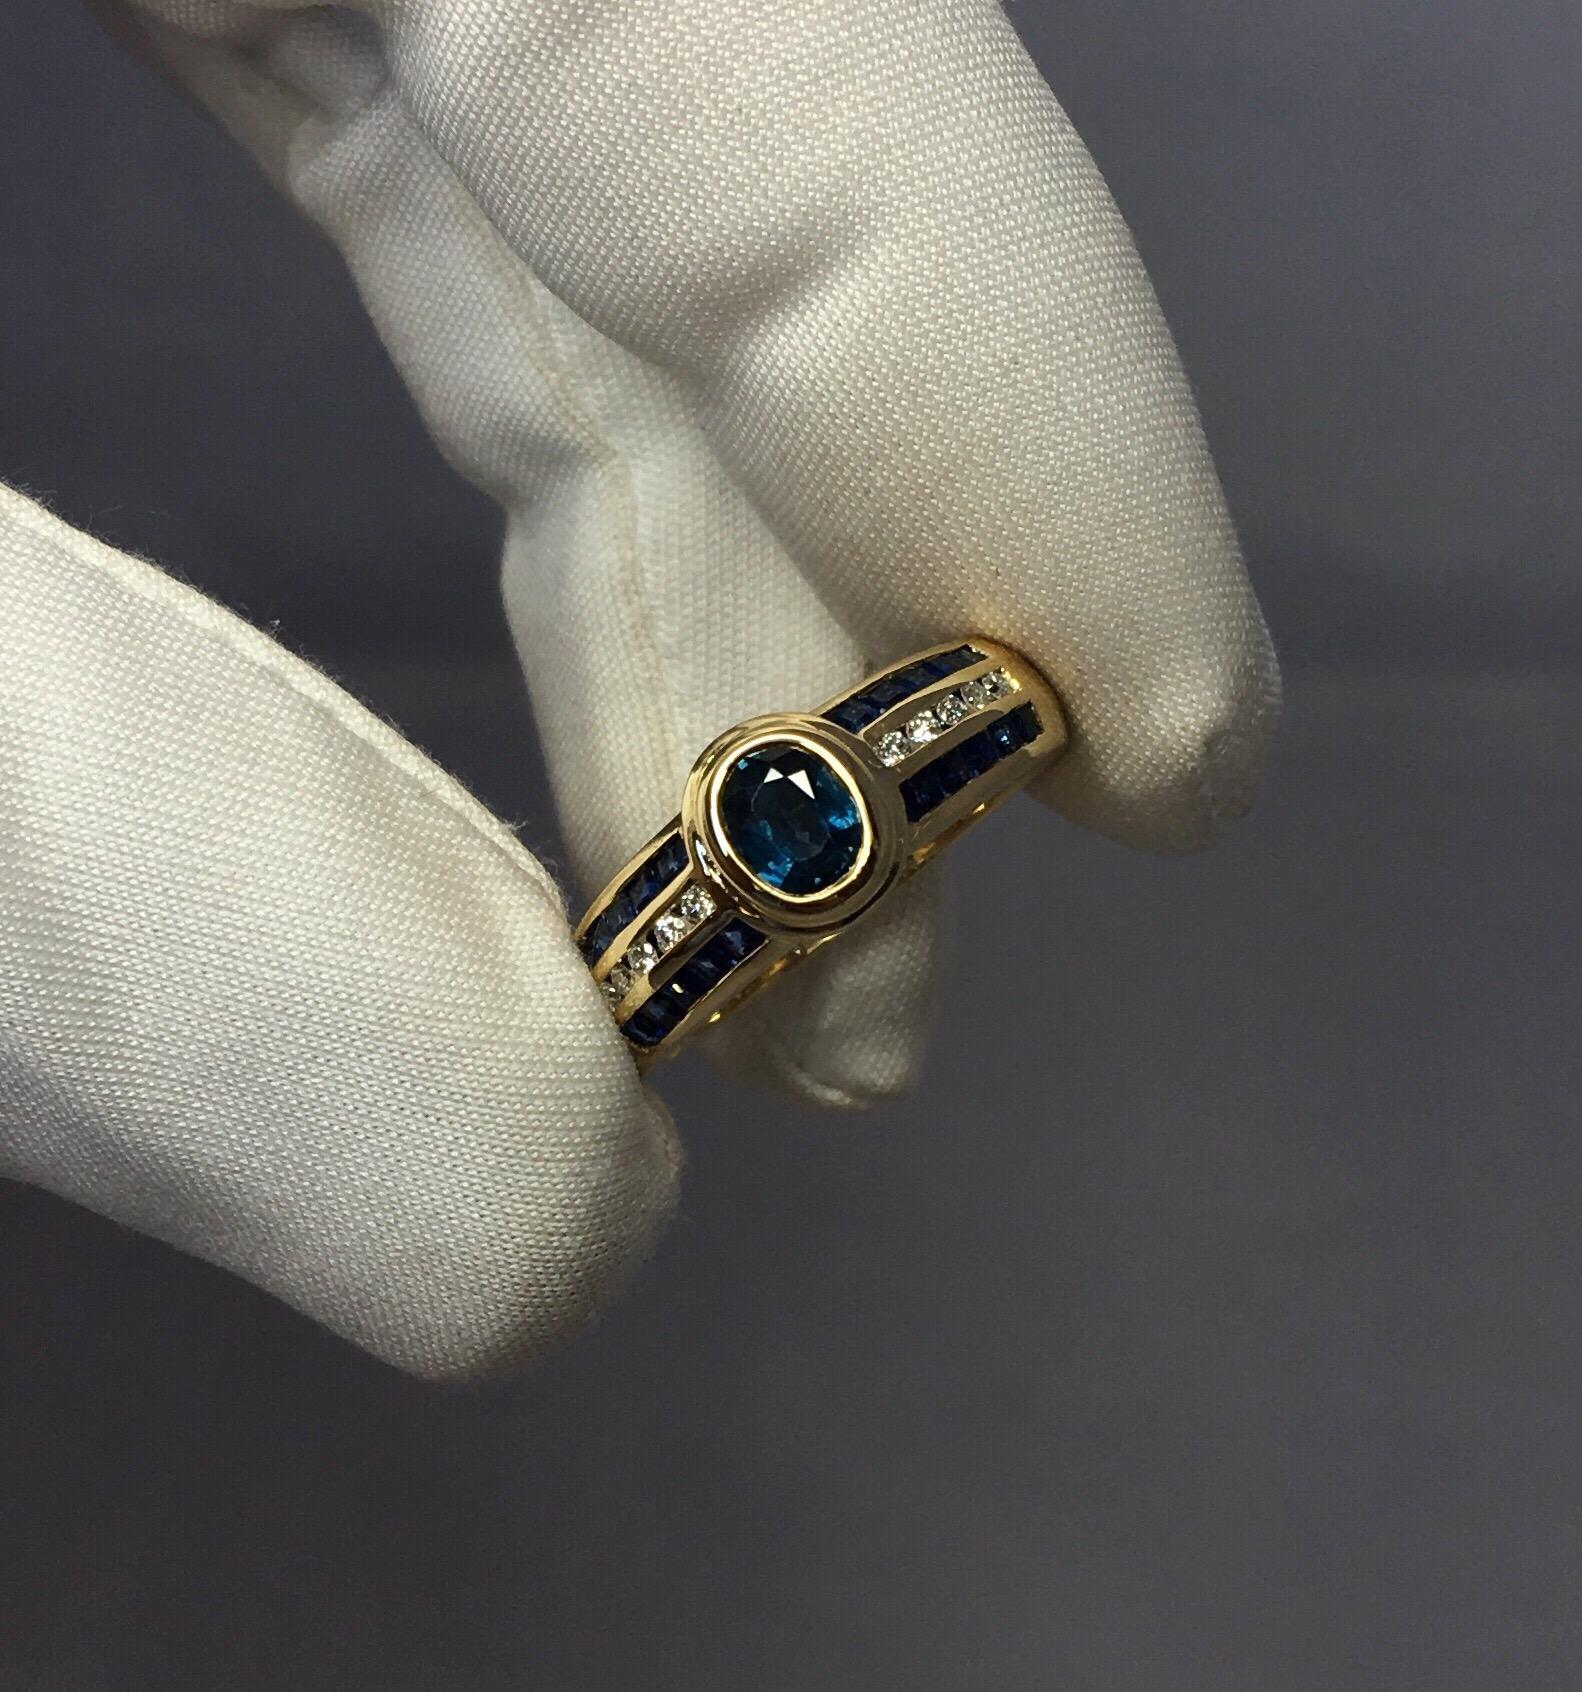 Stunning oval cut blue sapphire ring with round diamond and square sapphire accents.
All set in a fine 18k yellow gold European made ring. European hallmarks, either Dutch or Belgian.

The centre sapphire is approx 0.80 carat with a beautiful blue